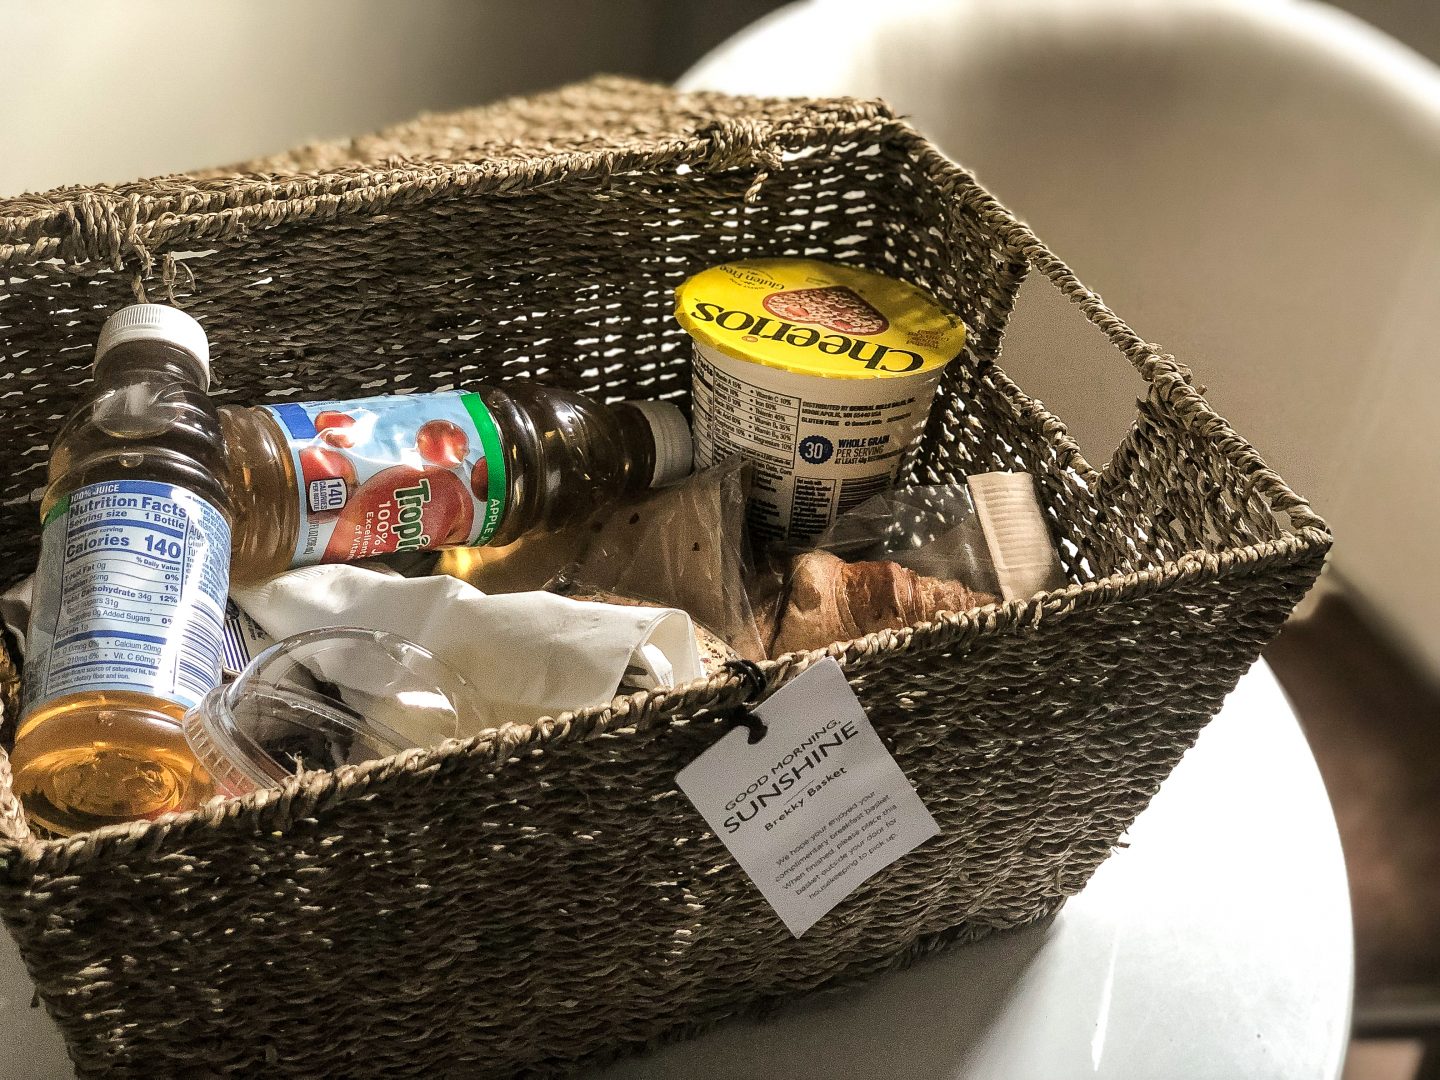 Continental breakfast provided in a basket by The Independent Hotel